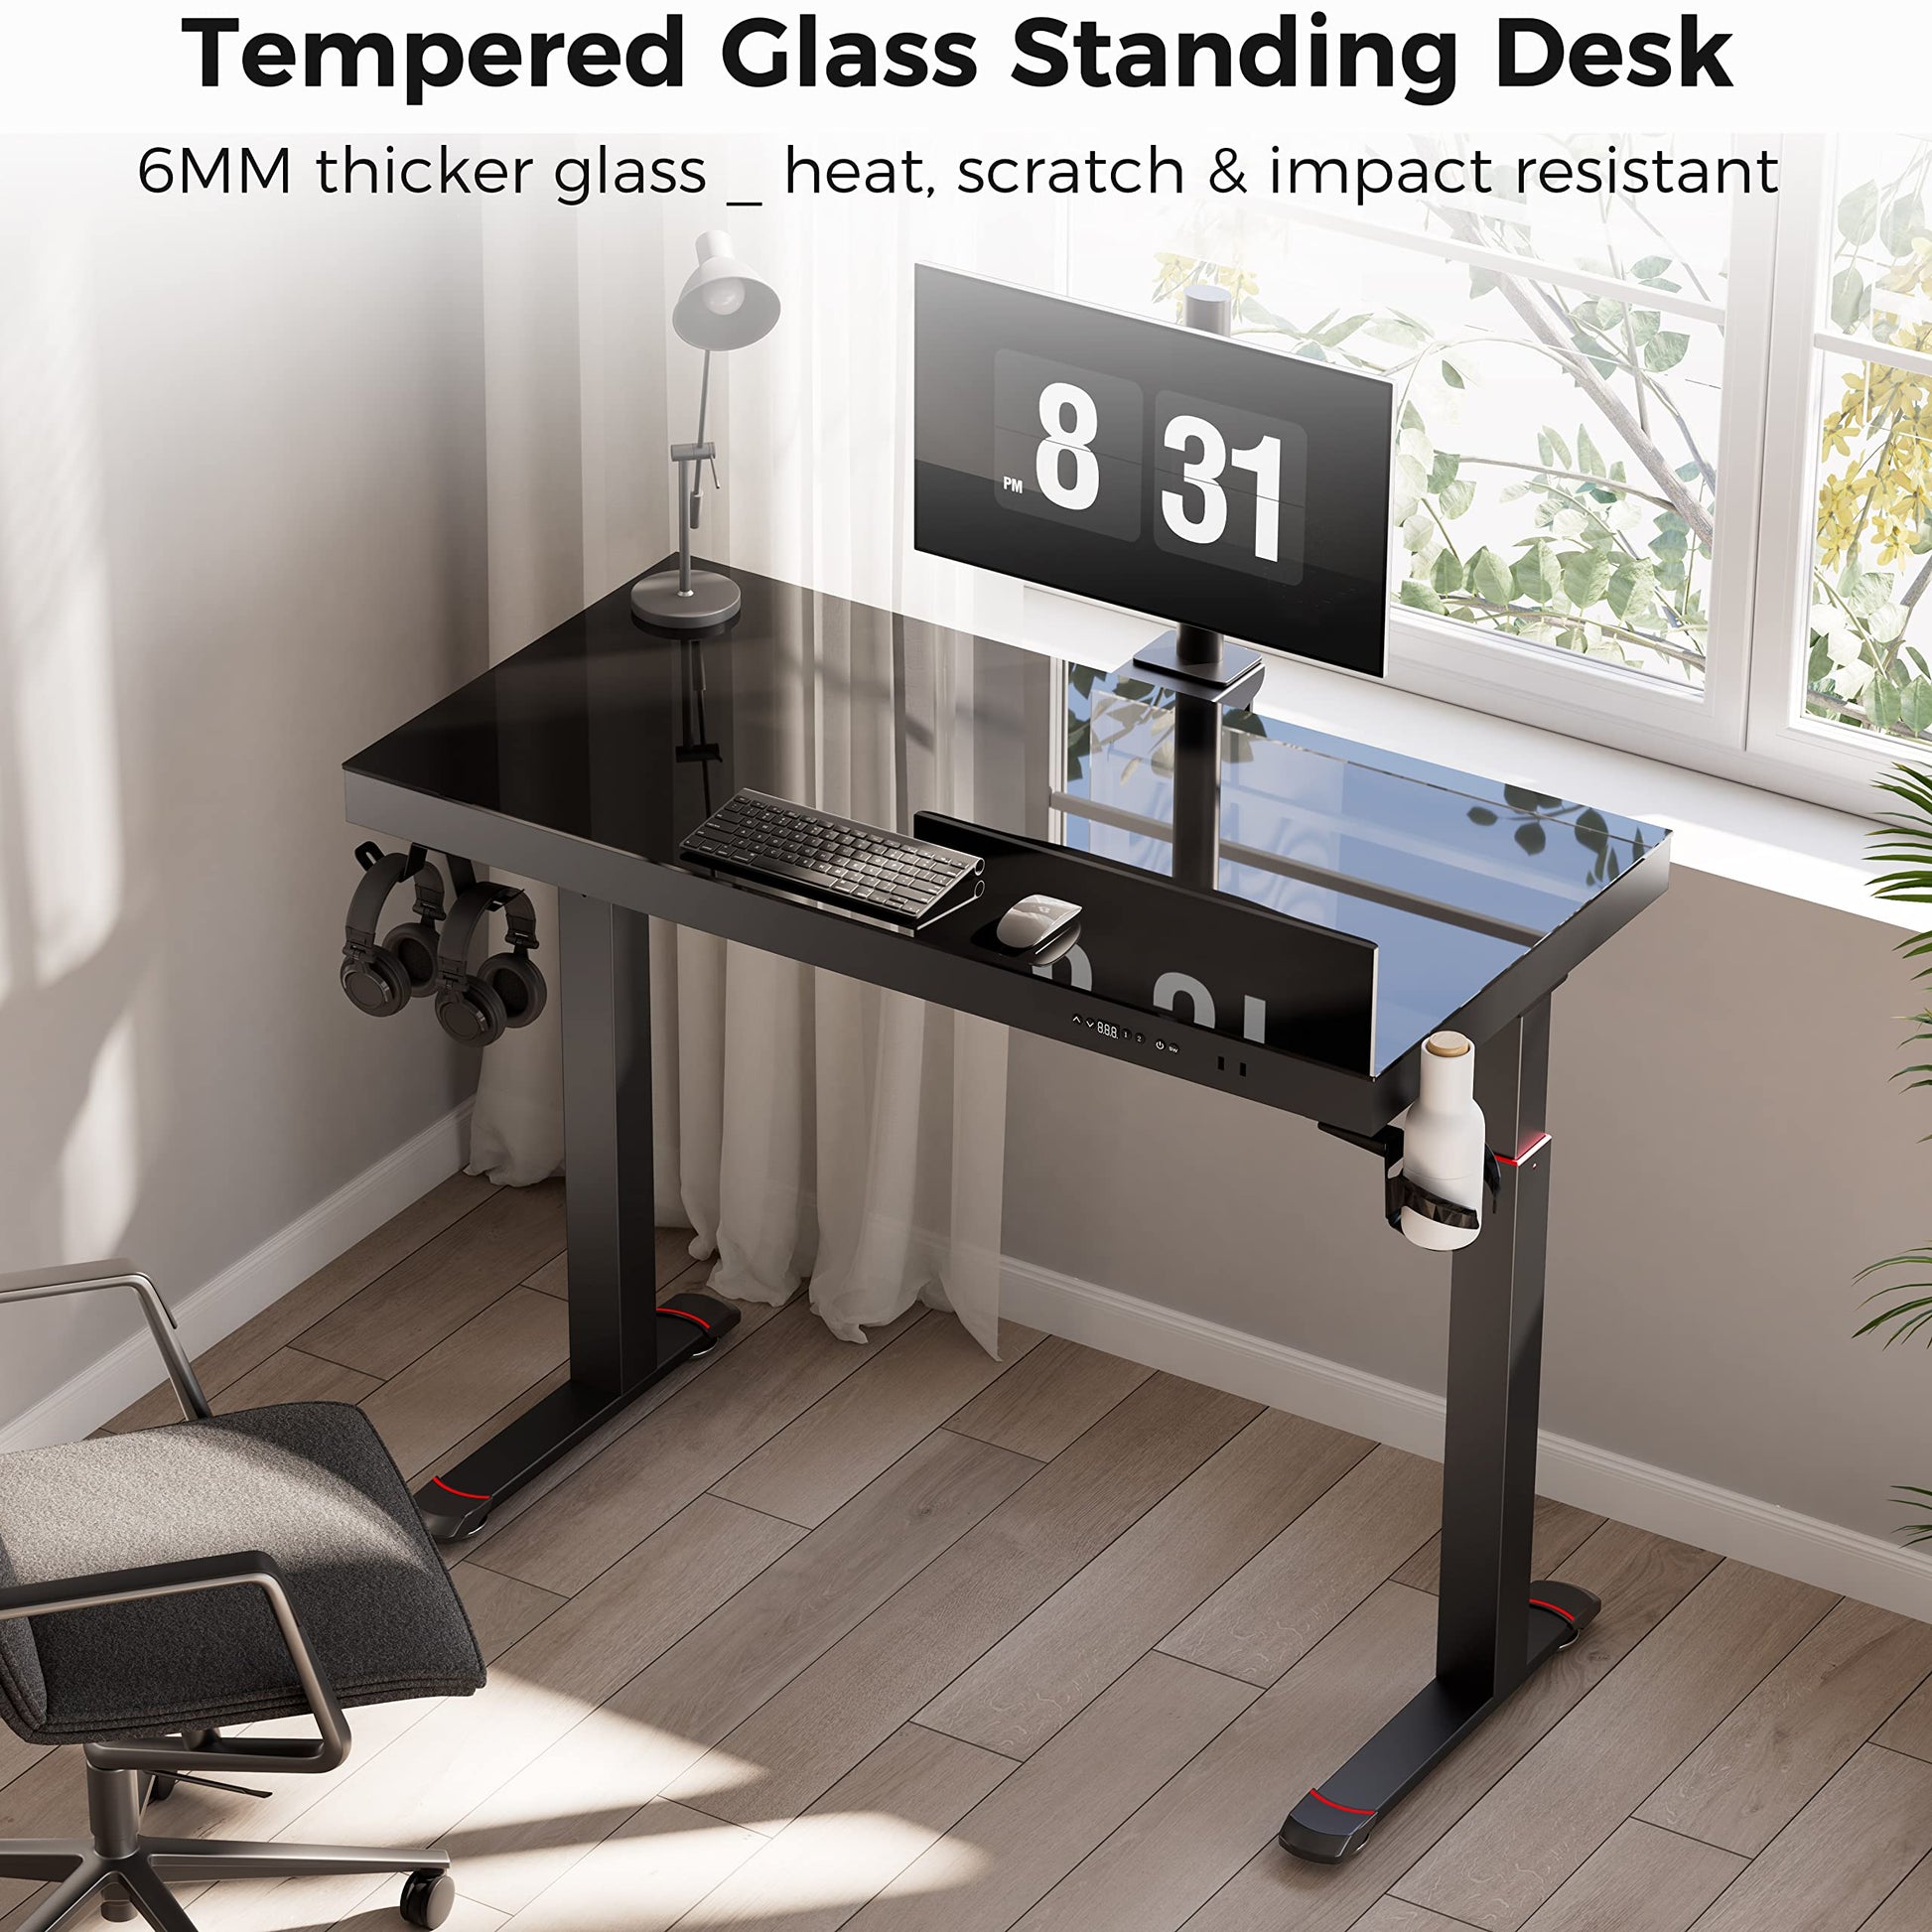 GTG 47 inch height adjustable RGB glass desk, gaming desk, RGB lighting, versatile design great for gaming room, work from home, content creation, sturdy standing desk, 6mm thick with heat, scratch and impact resistance